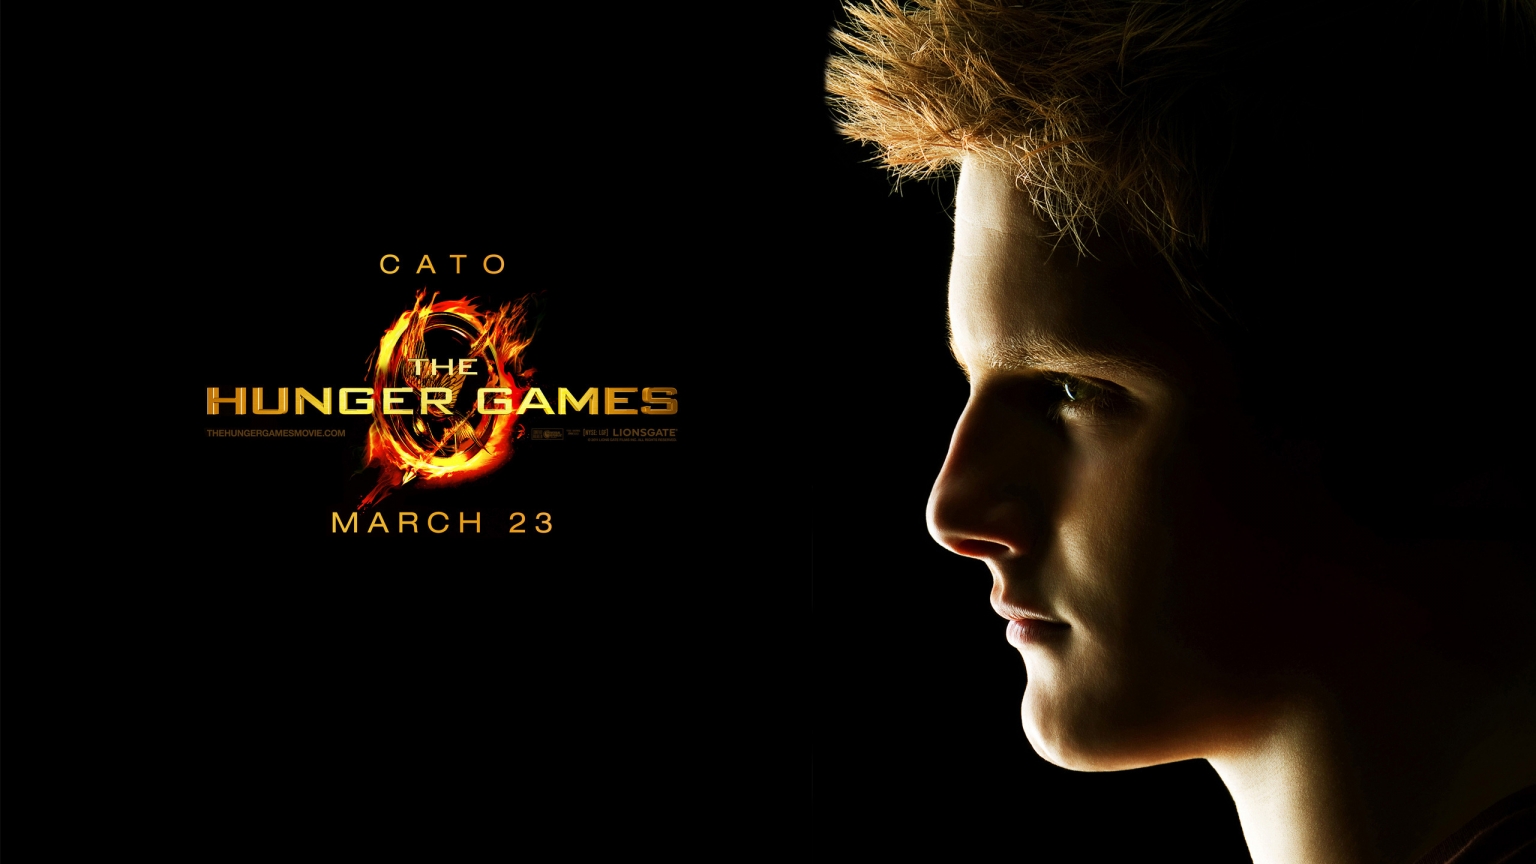 The Hunger Games Cato for 1536 x 864 HDTV resolution